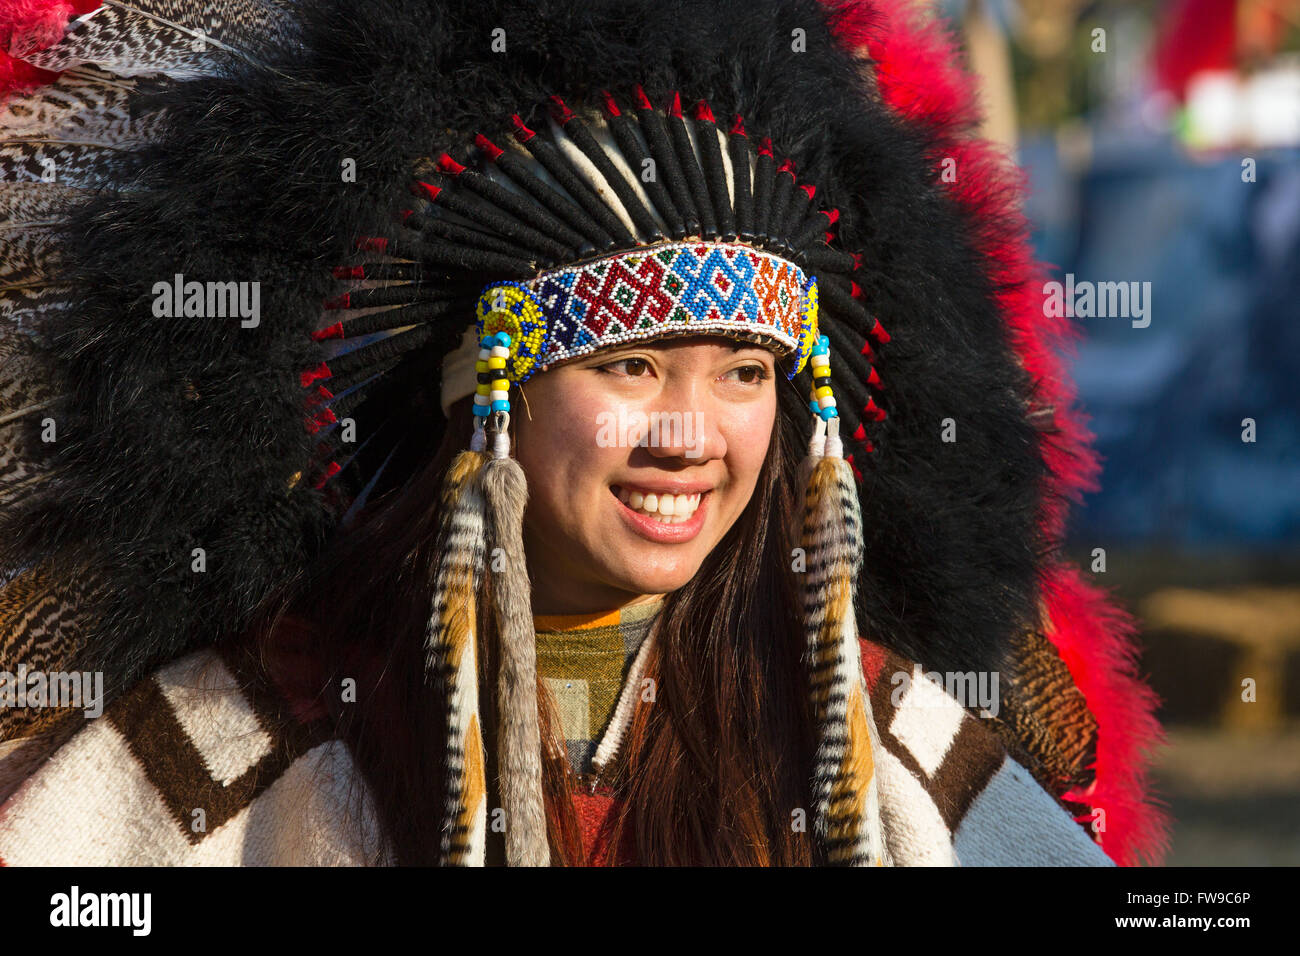 Young Asian woman with Indian jewelry at a festival with headdress, Chiang Rai Festival, Chiang Rai Province, Northern Thailand Stock Photo